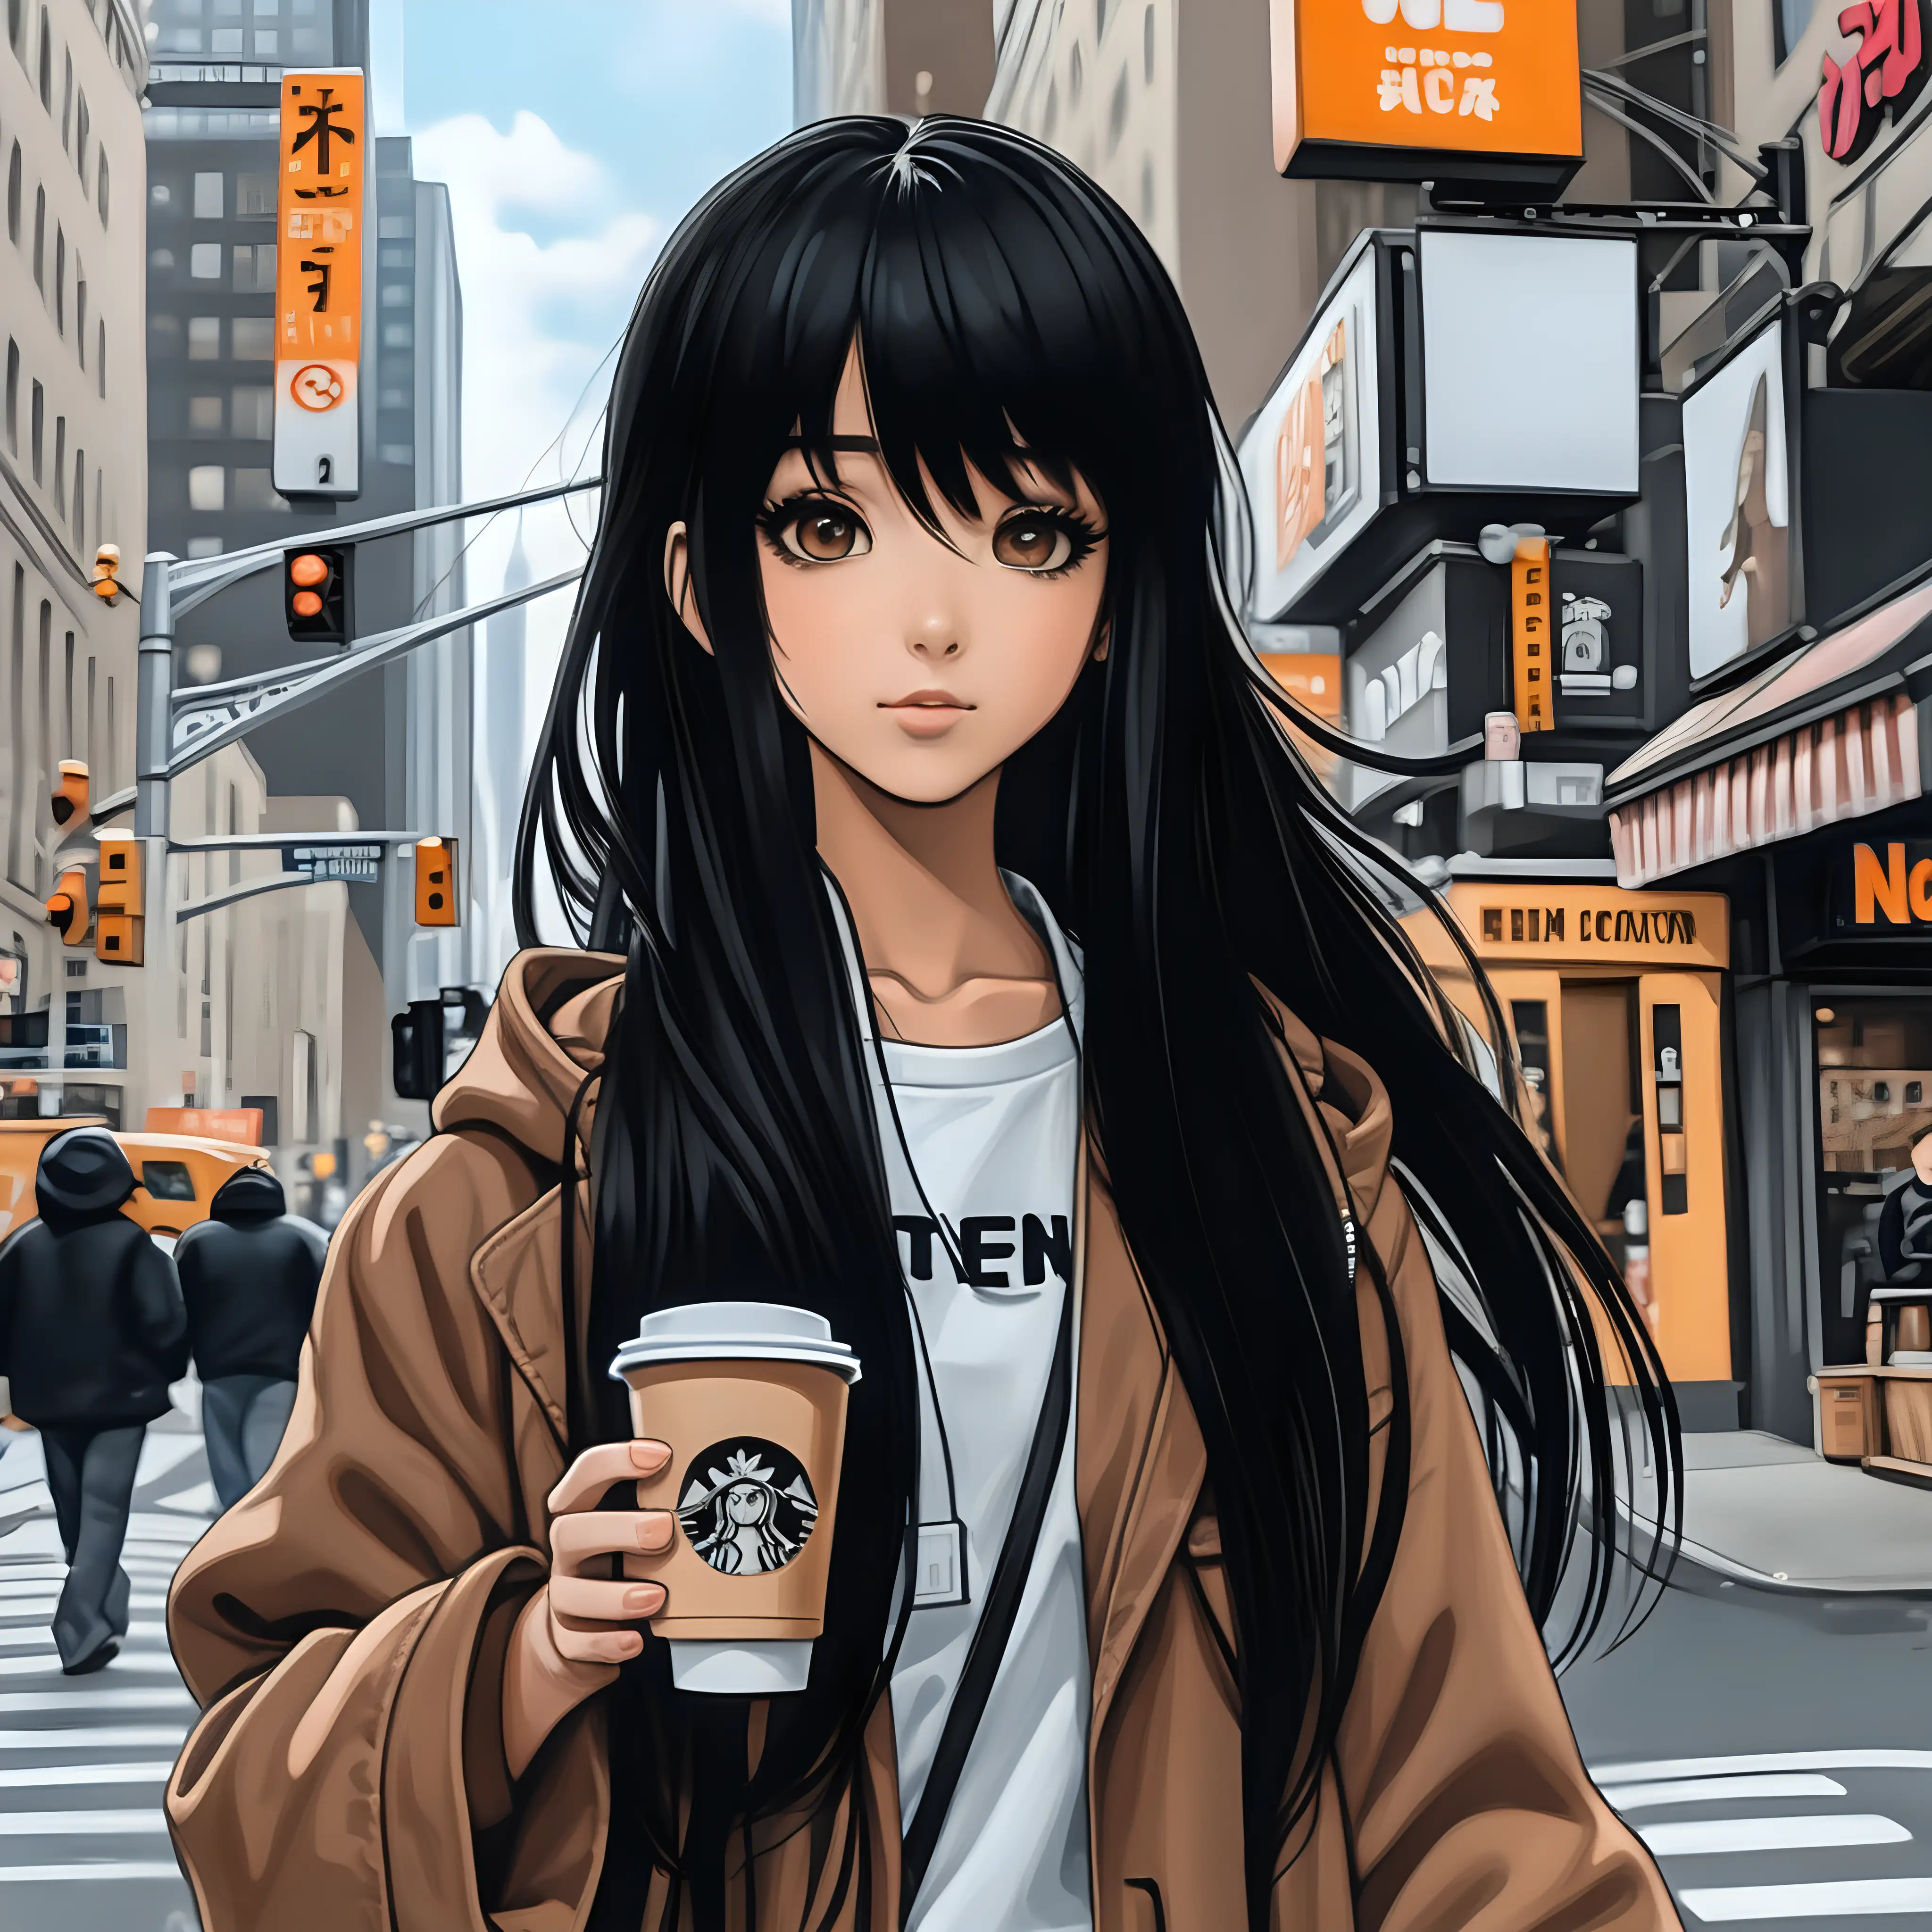 Stylish Anime Girl with Coffee in New York City